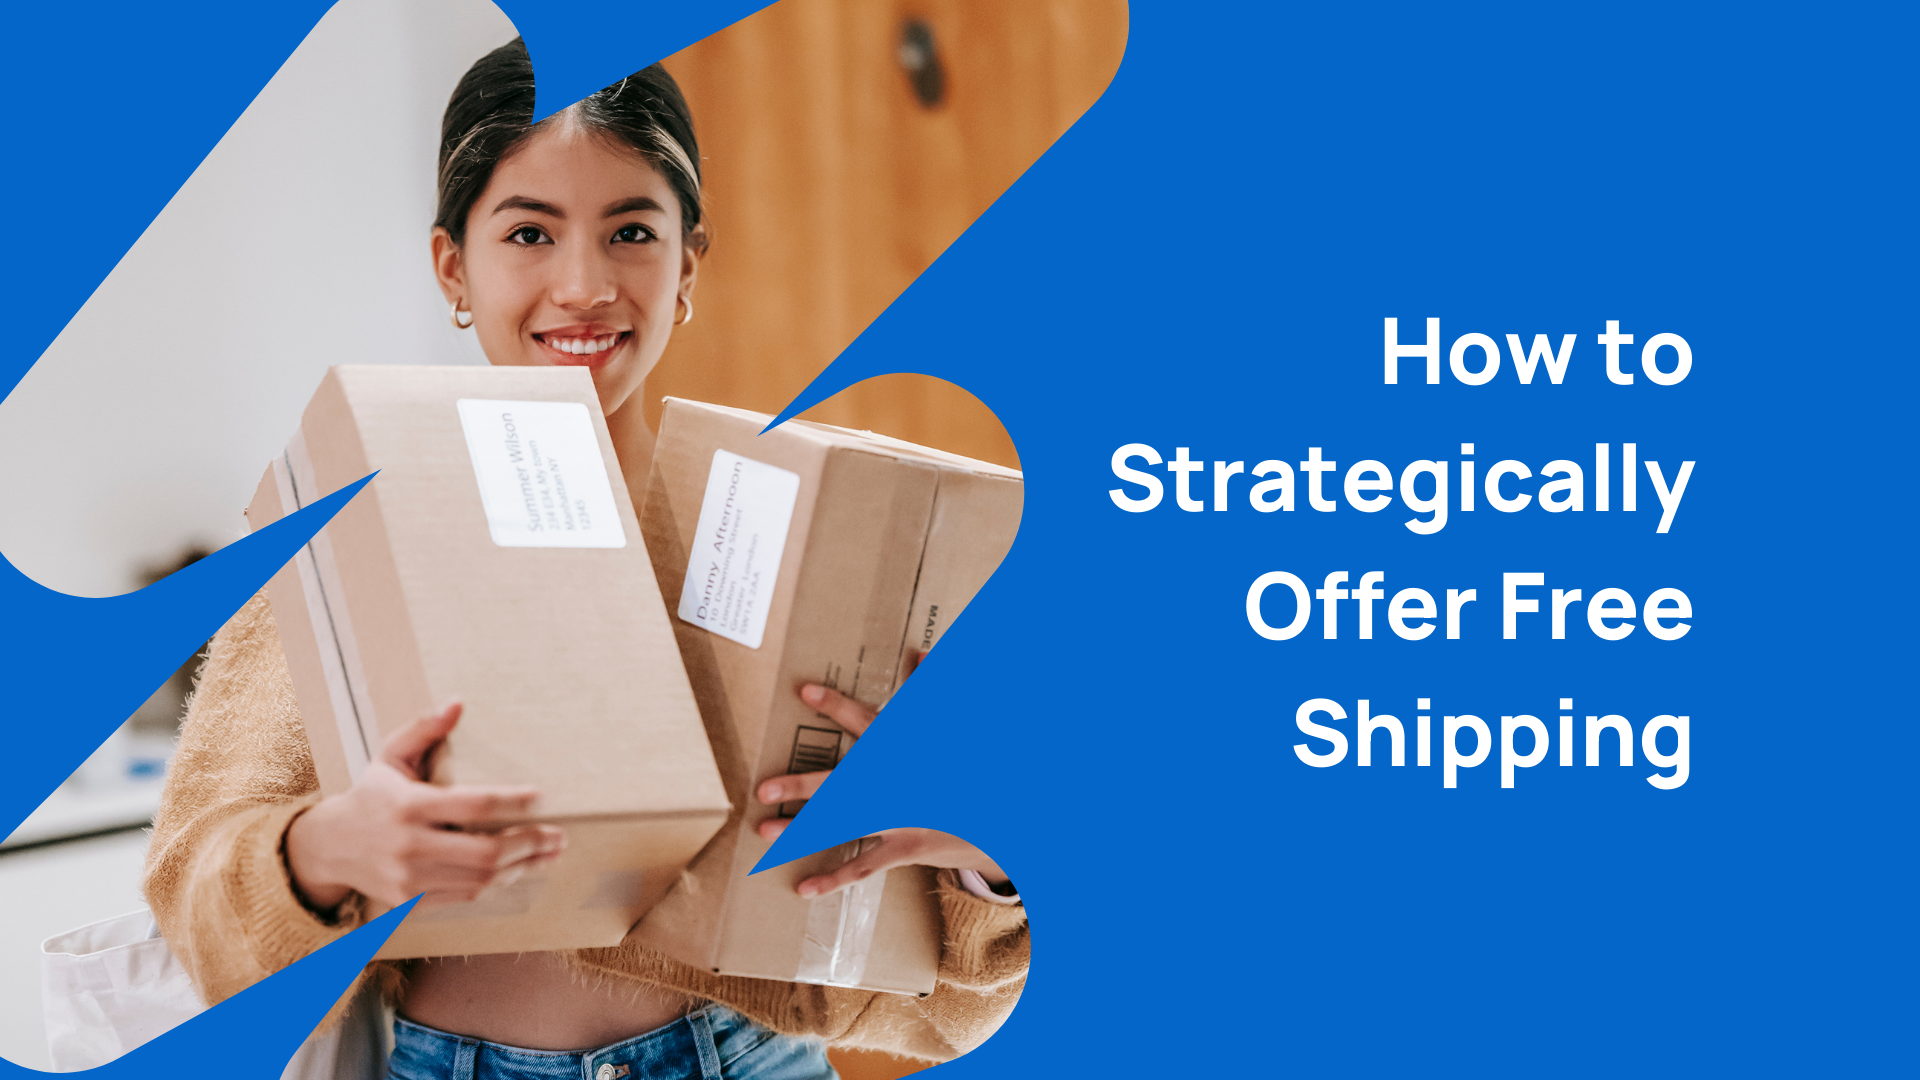 How to strategically offer free shipping